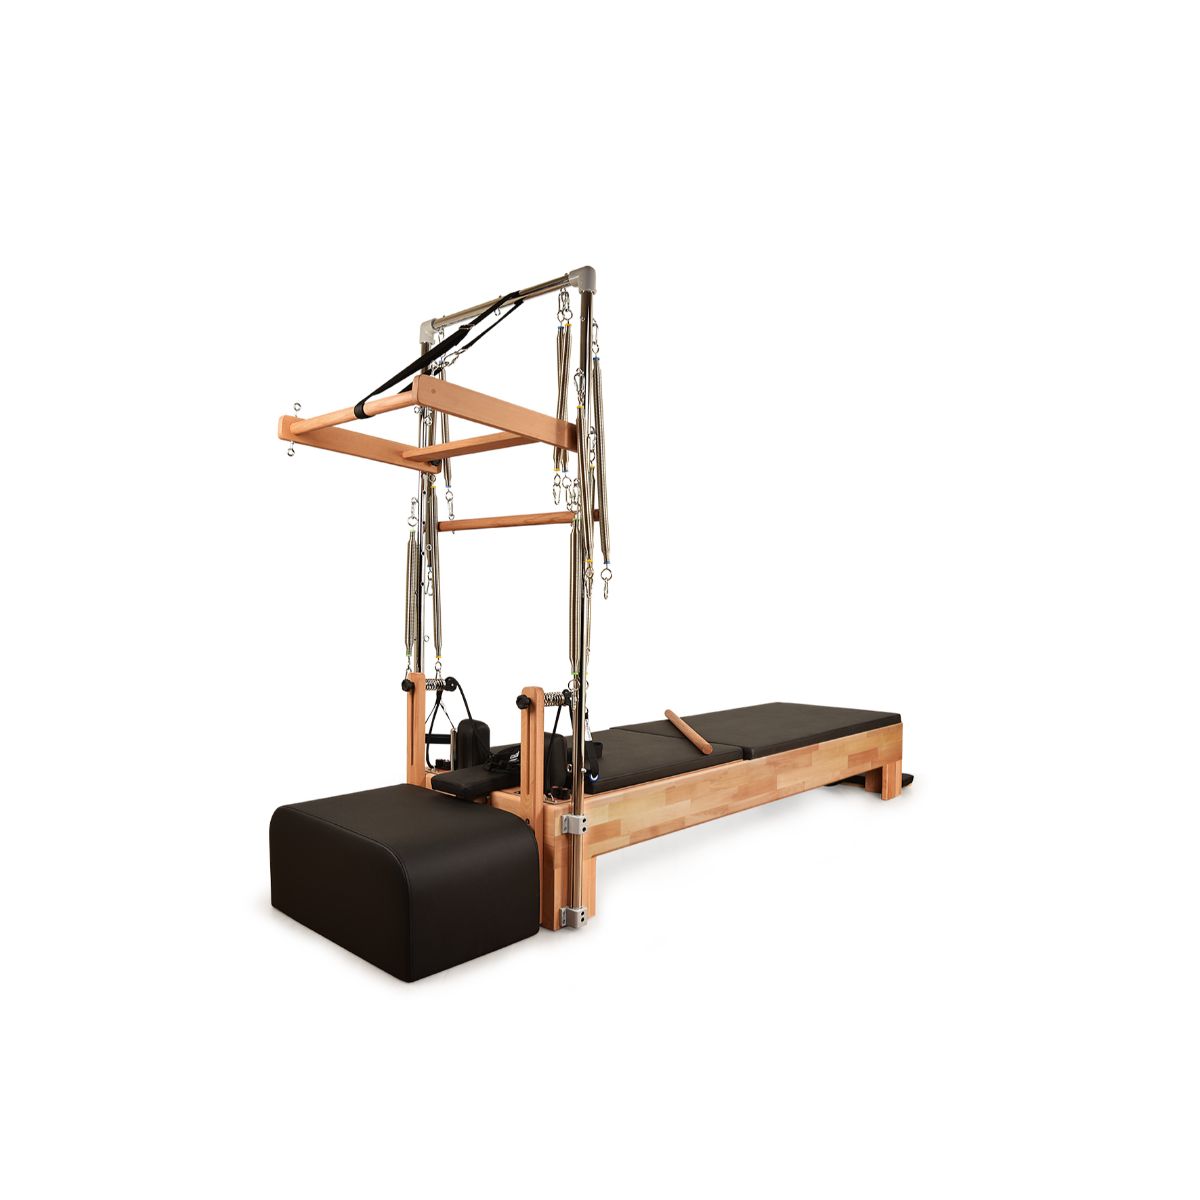 Private Pilates Premium Wood Reformer with Tower - Pilates Reformers Plus